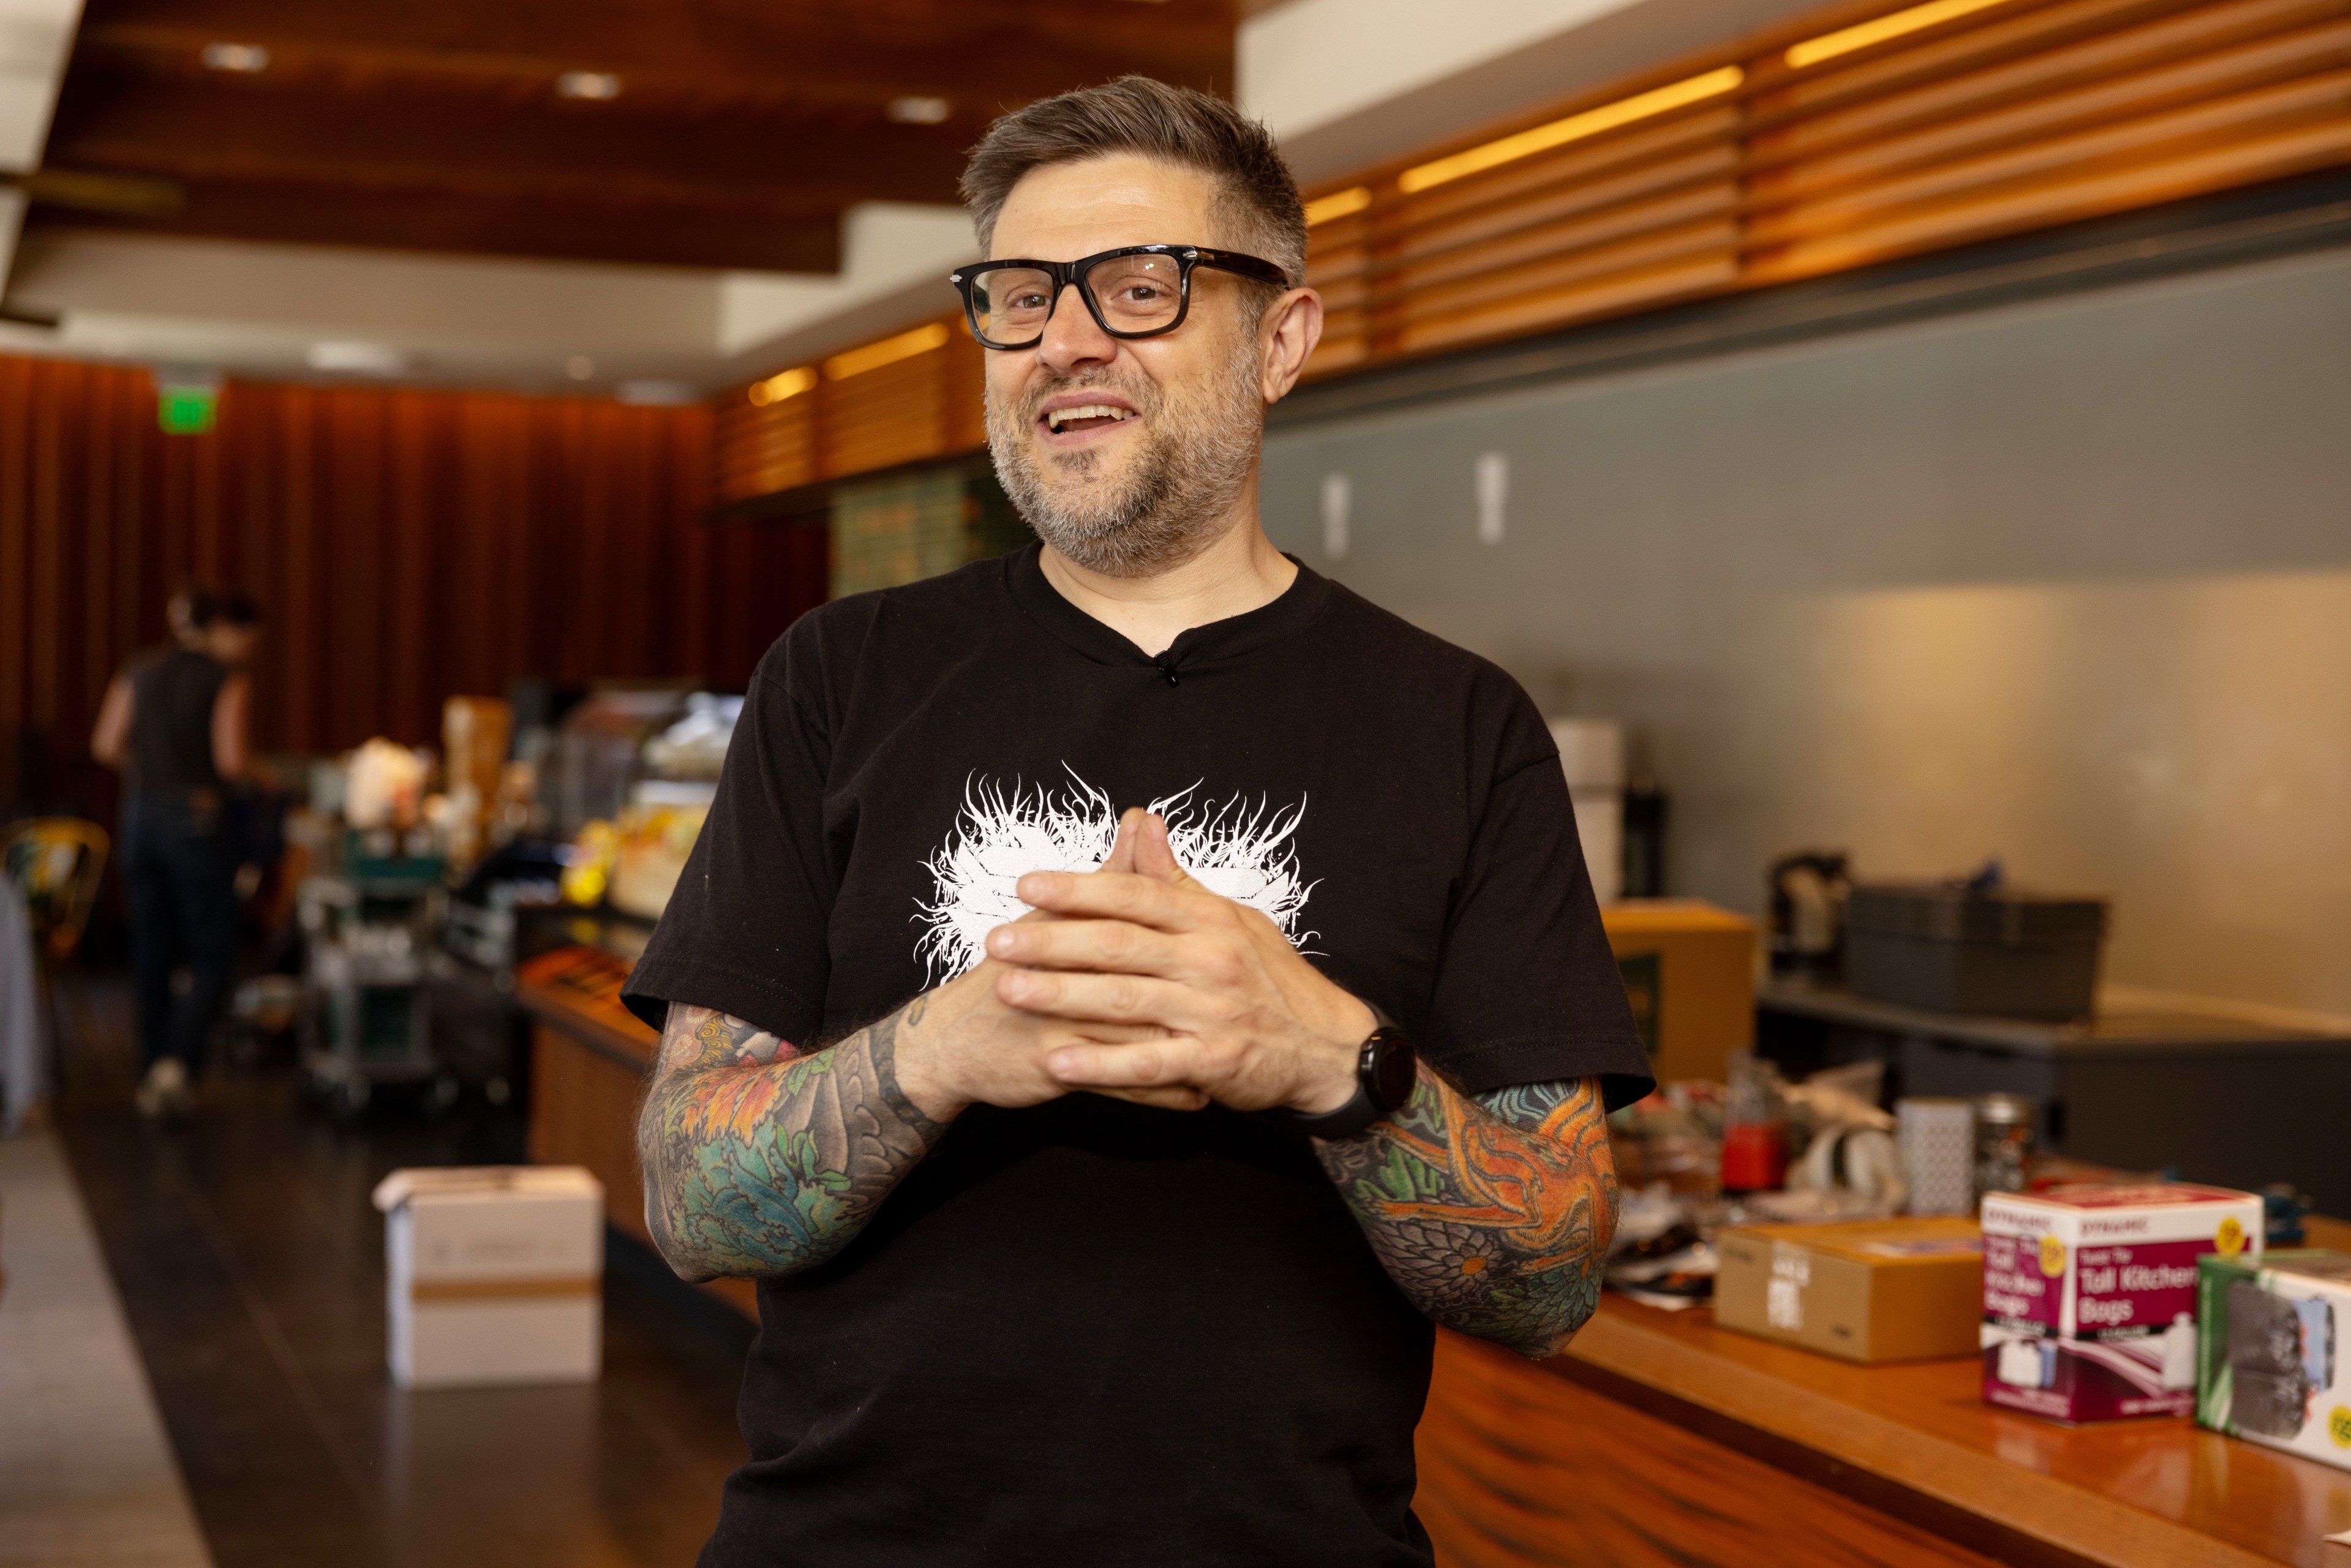 A man with glasses and colorful arm tattoos stands indoors. He wears a black T-shirt with a white design and is speaking, with various items on a counter behind him.